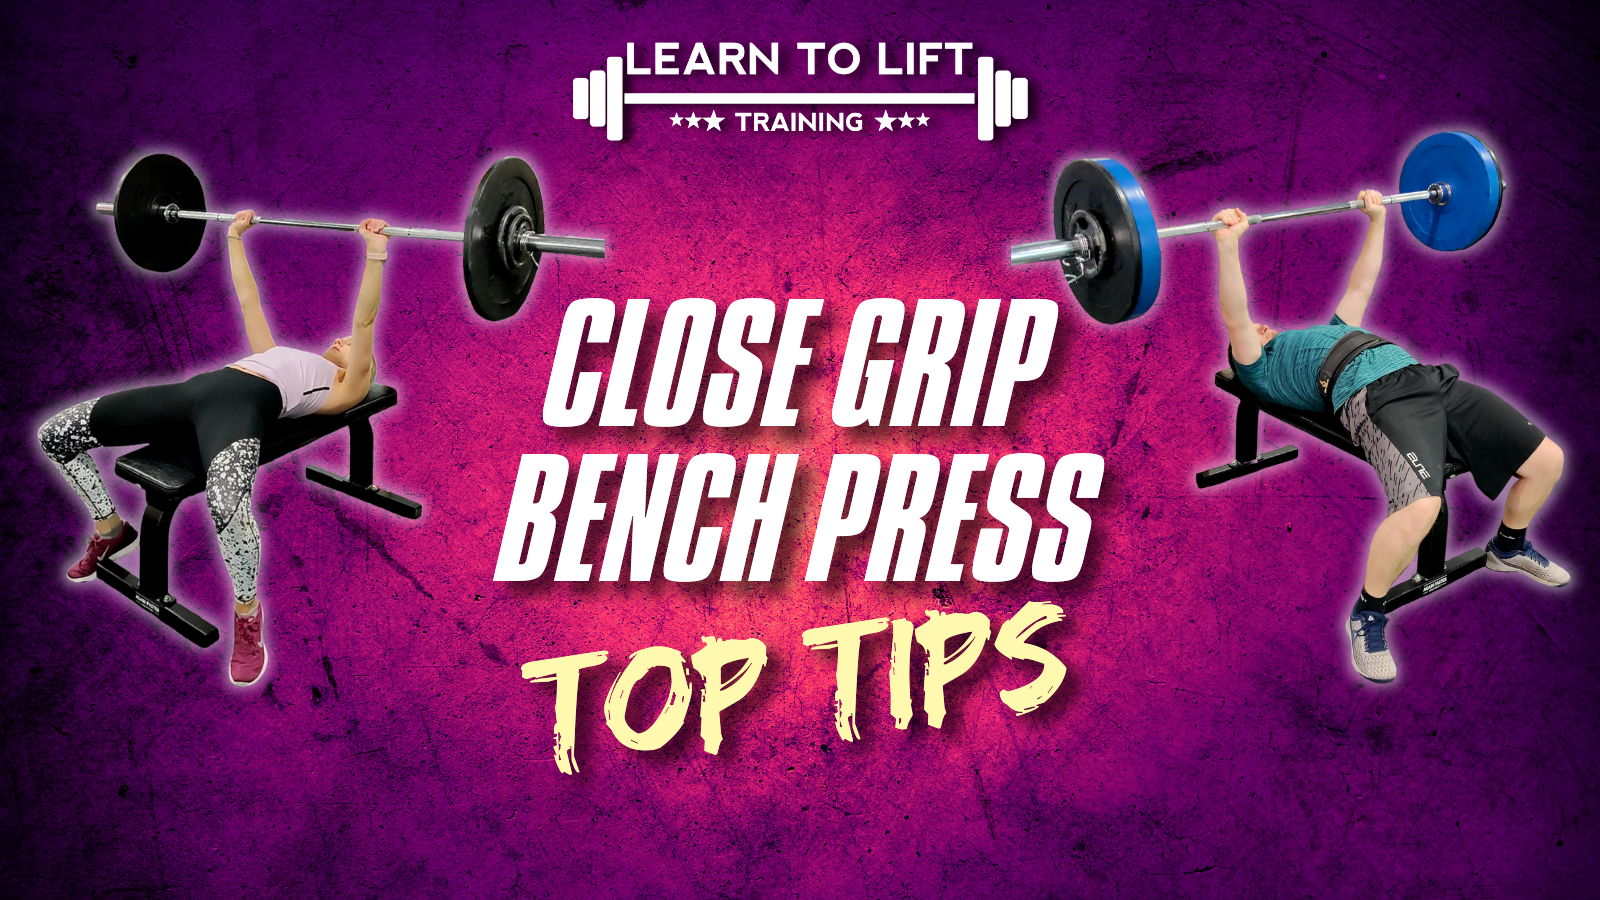 Personal Training Glasgow - Close Grip Bench Press Top Tips